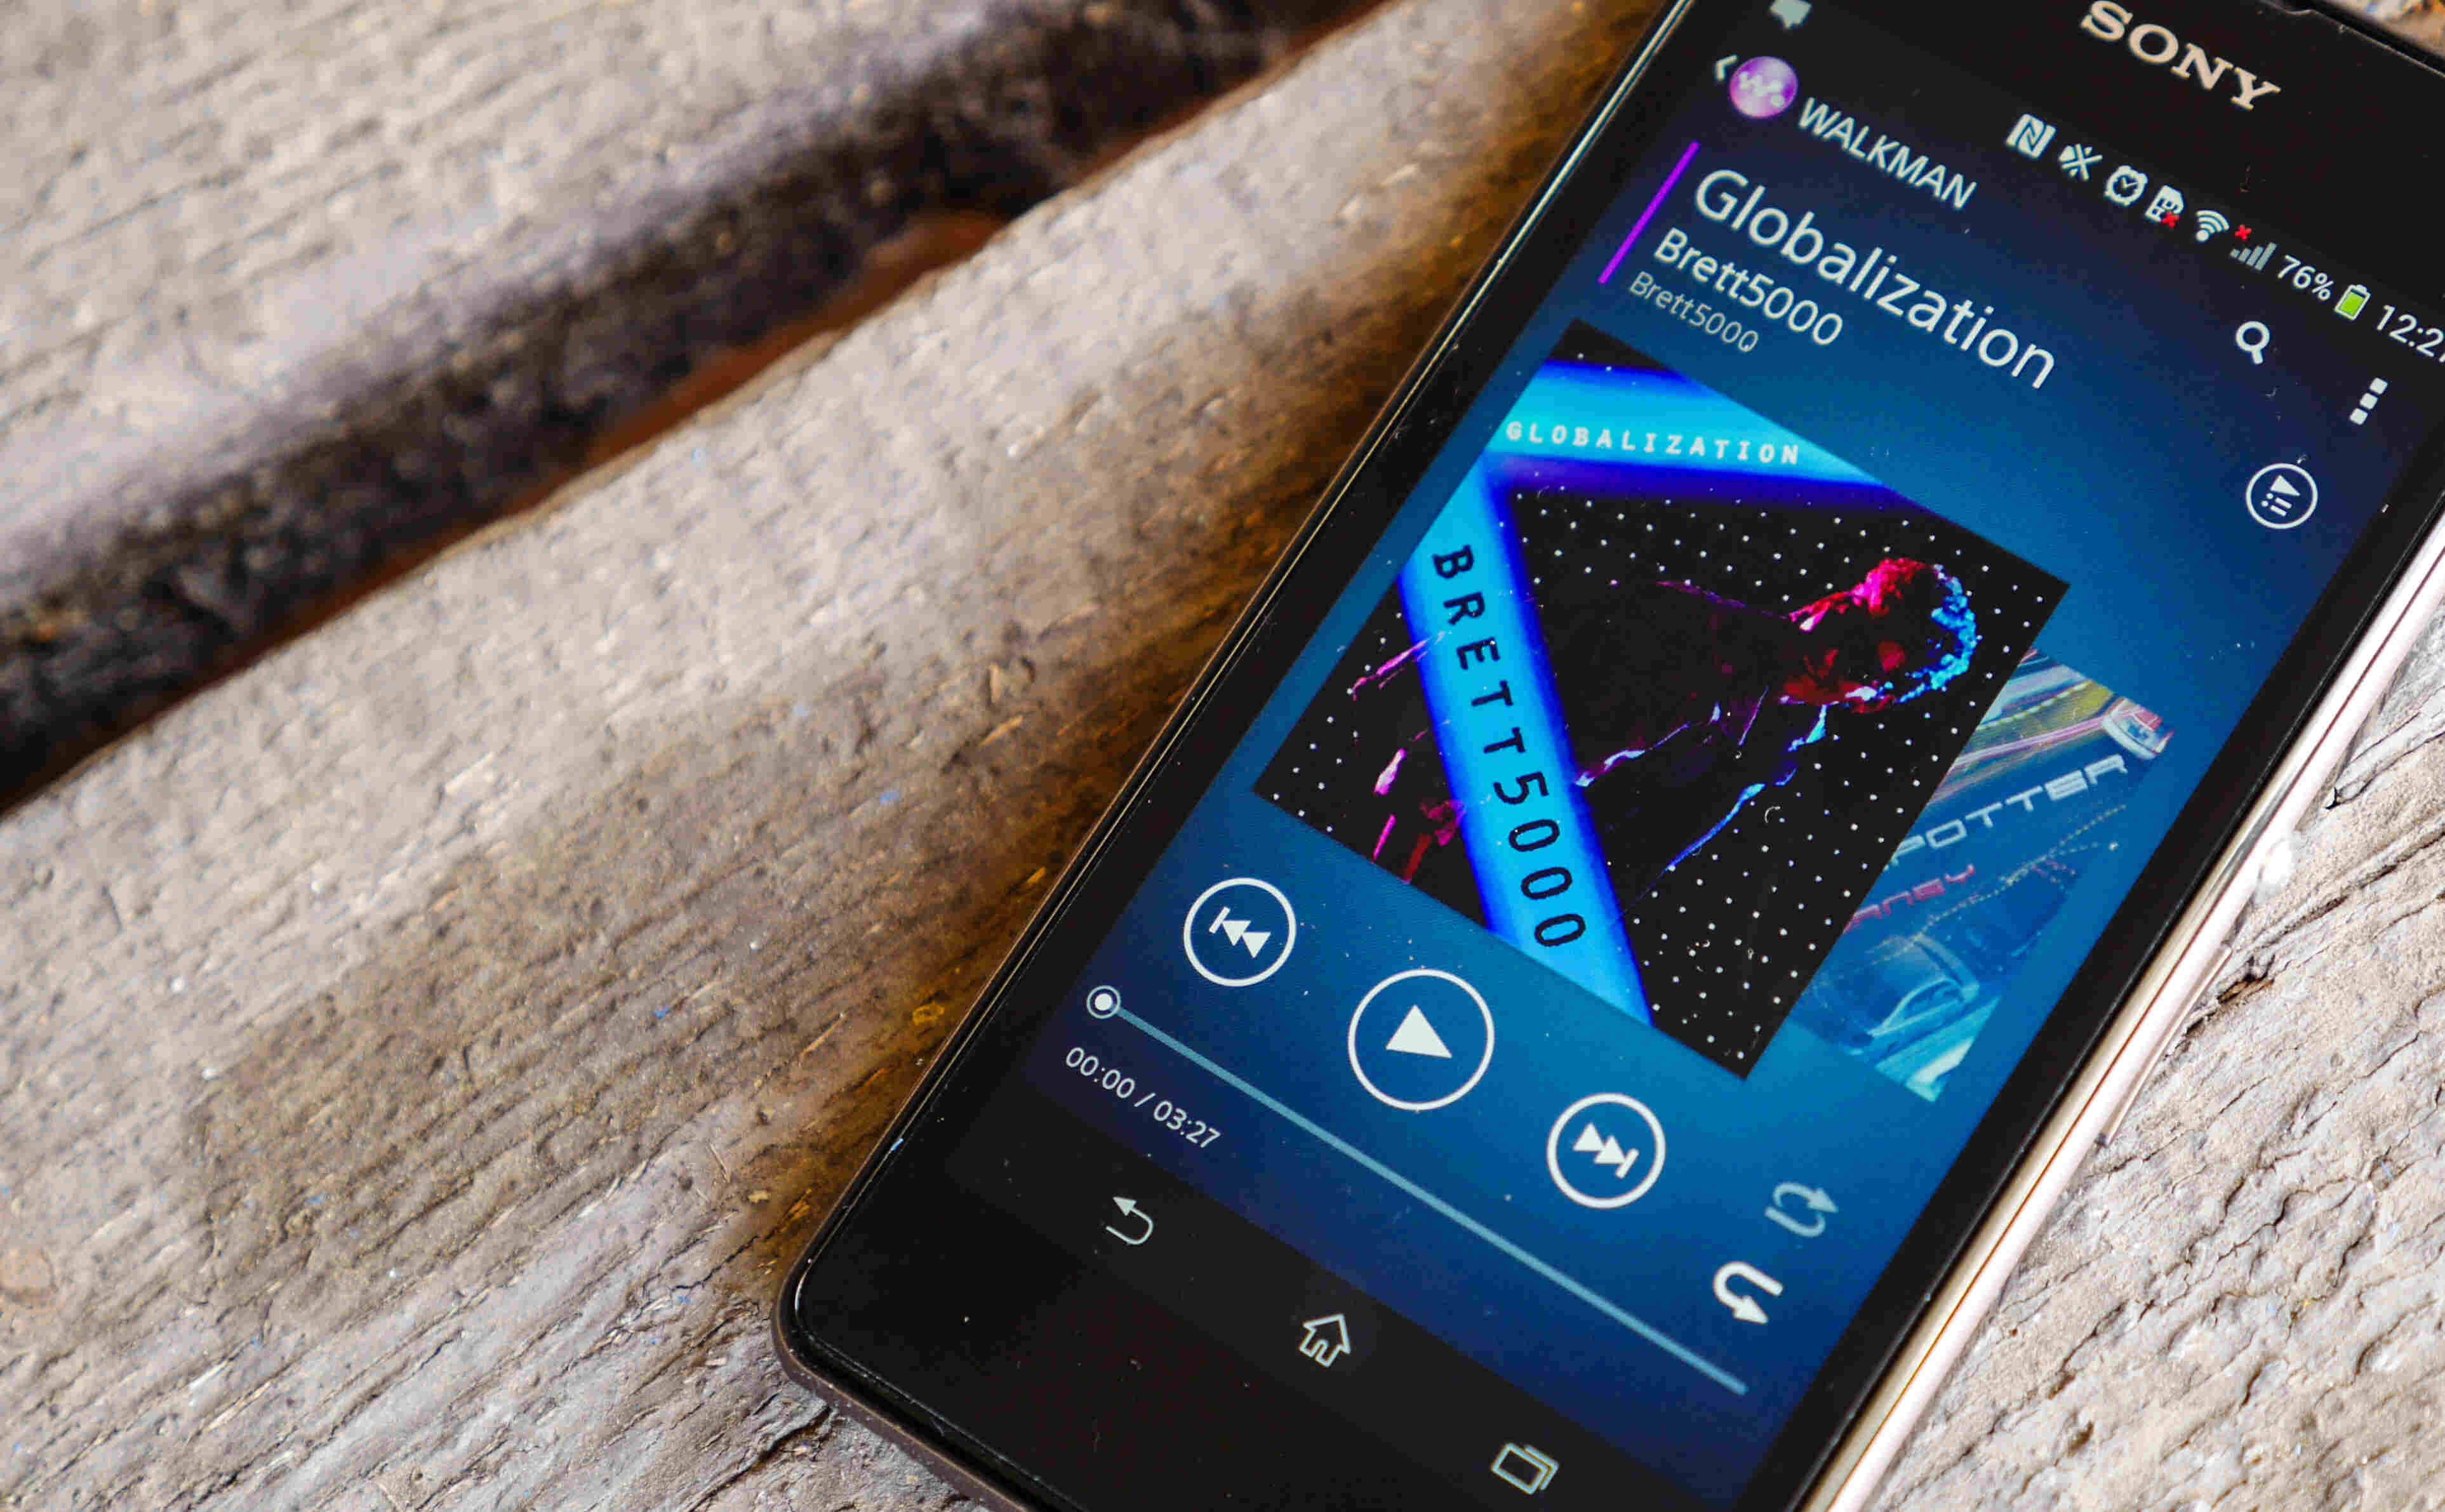 Adding Music To Your Xperia Z: Downloading Guide